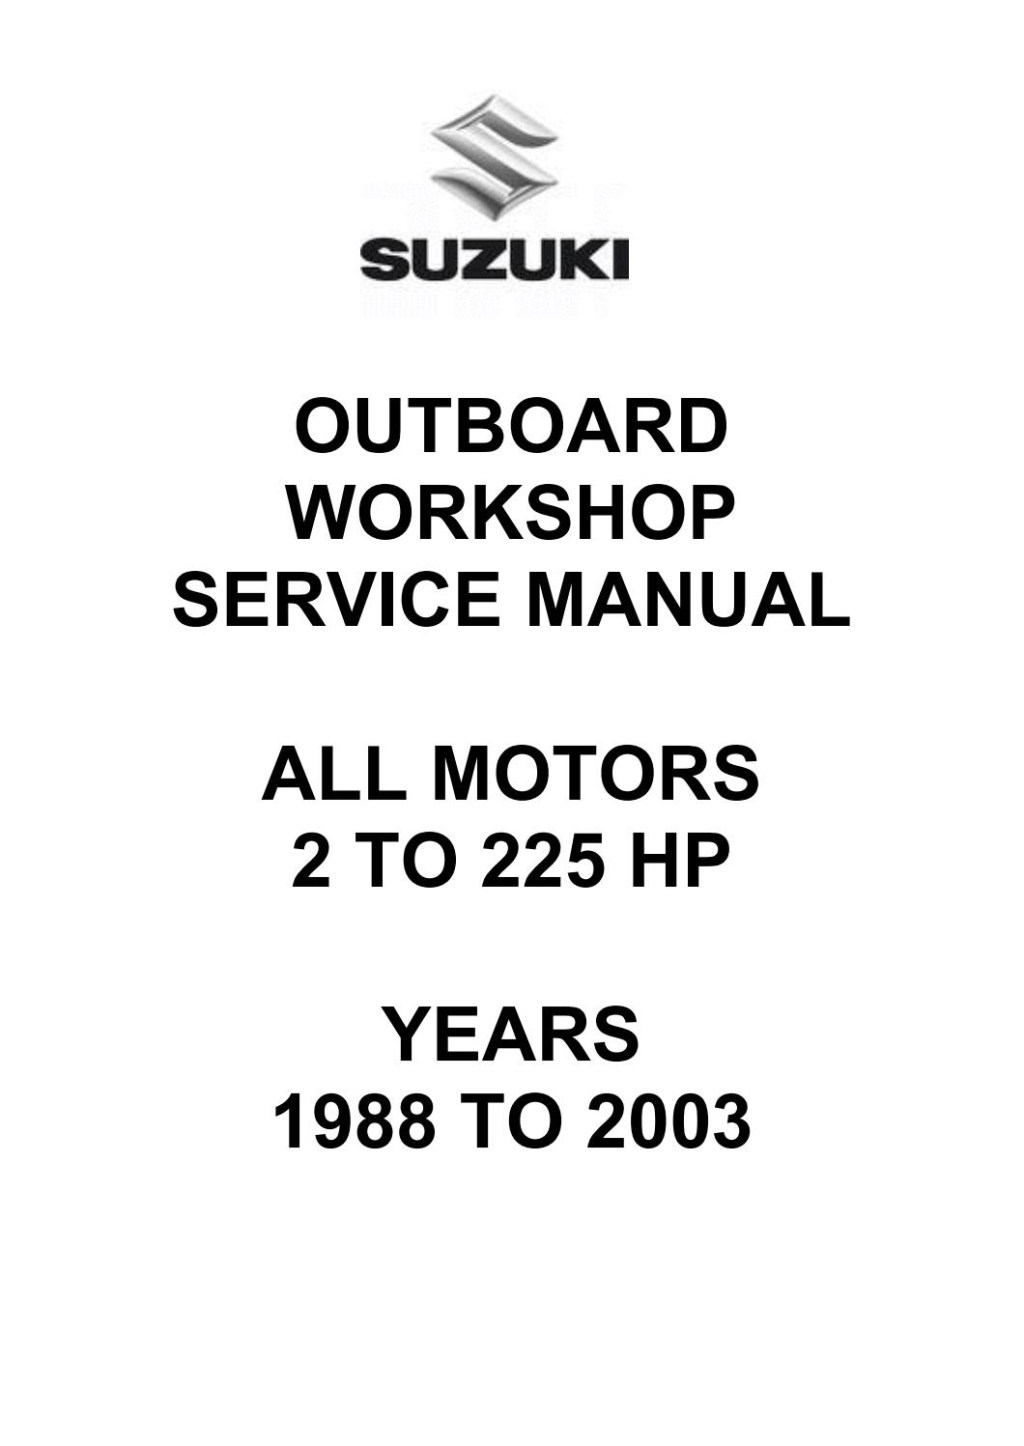 suzuki dt 200 owners manual - Suzuki Outboard Workshop Service Manual - All Motors by glsense